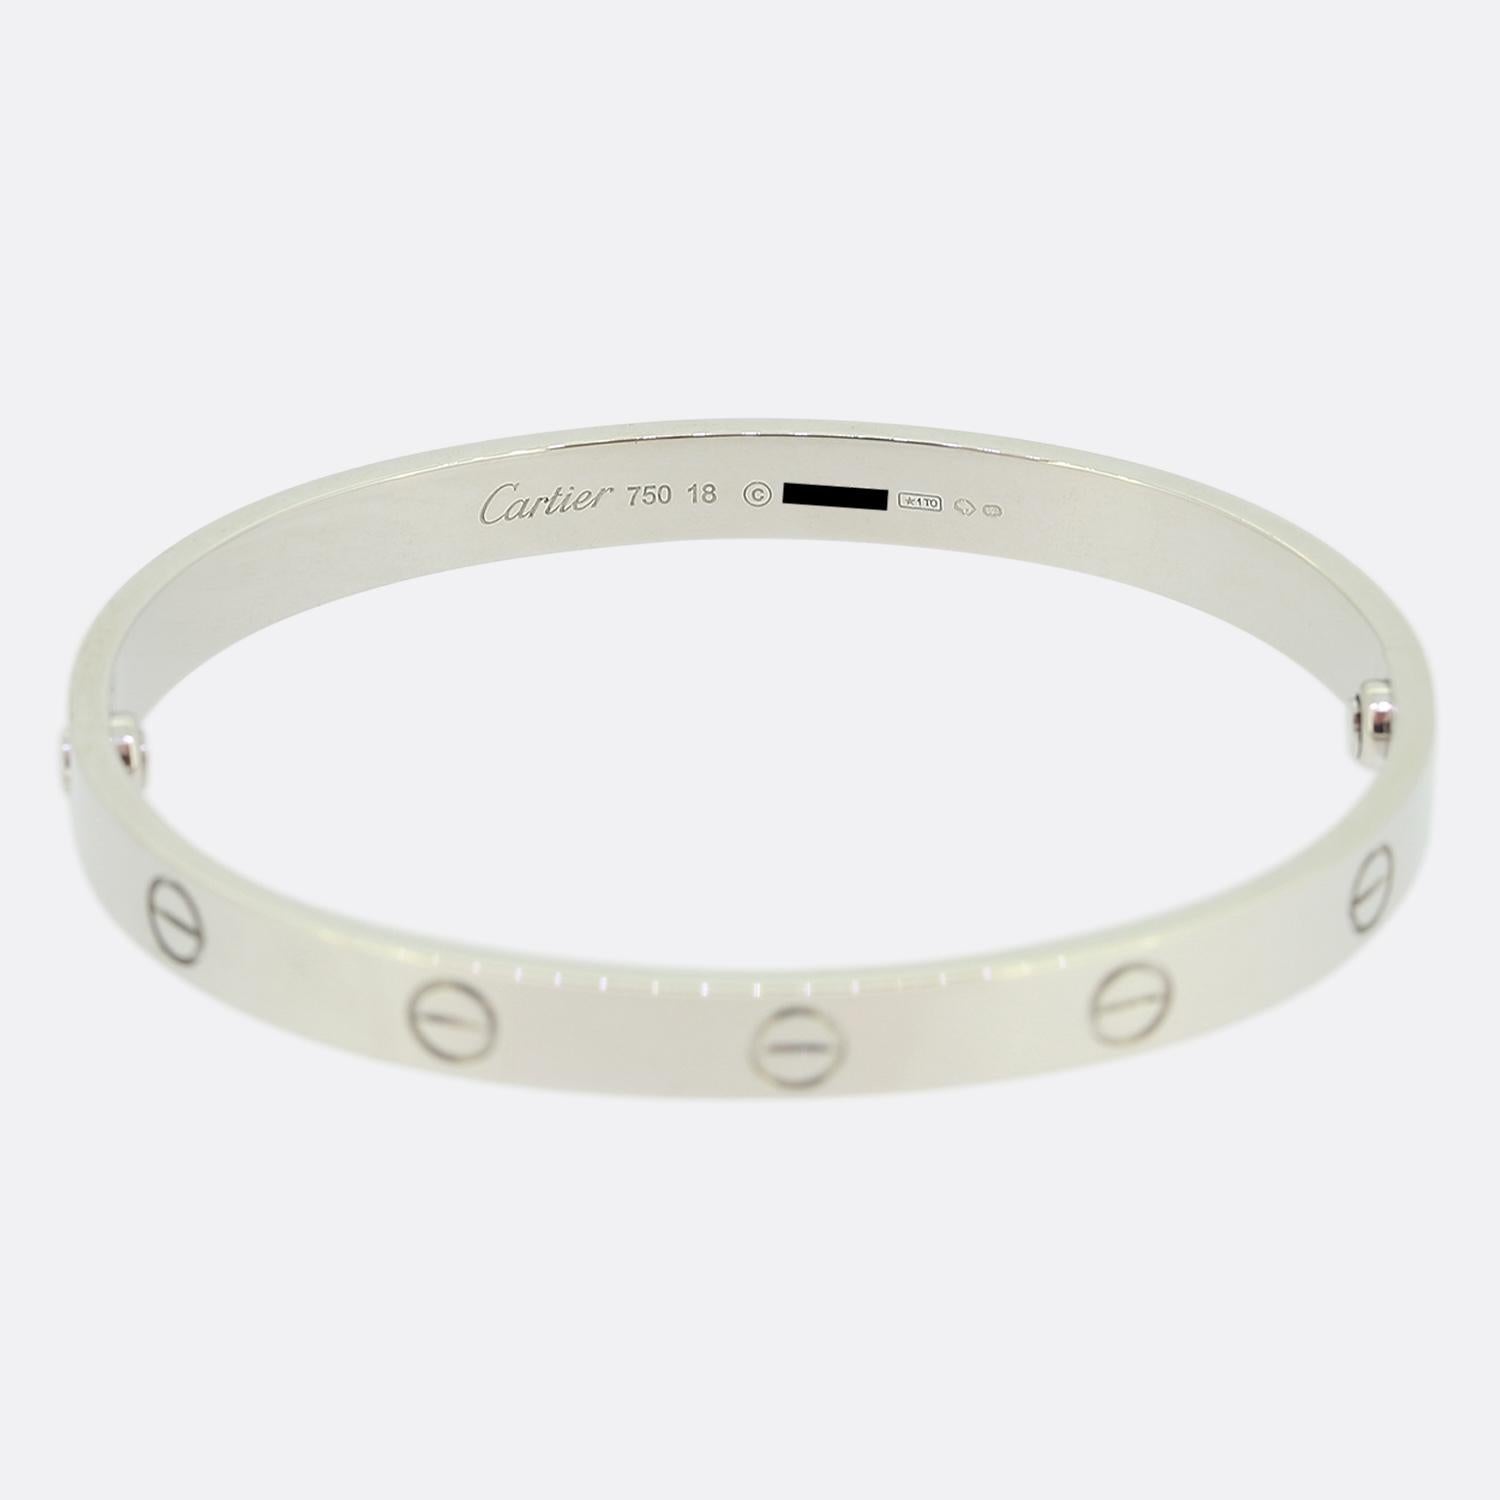 Here we have an 18ct white gold bangle from the world renowned luxury jewellery house of Cartier. This bangle forms part of the LOVE collection and is one of the most celebrated items of jewellery in the world. This particular model features the